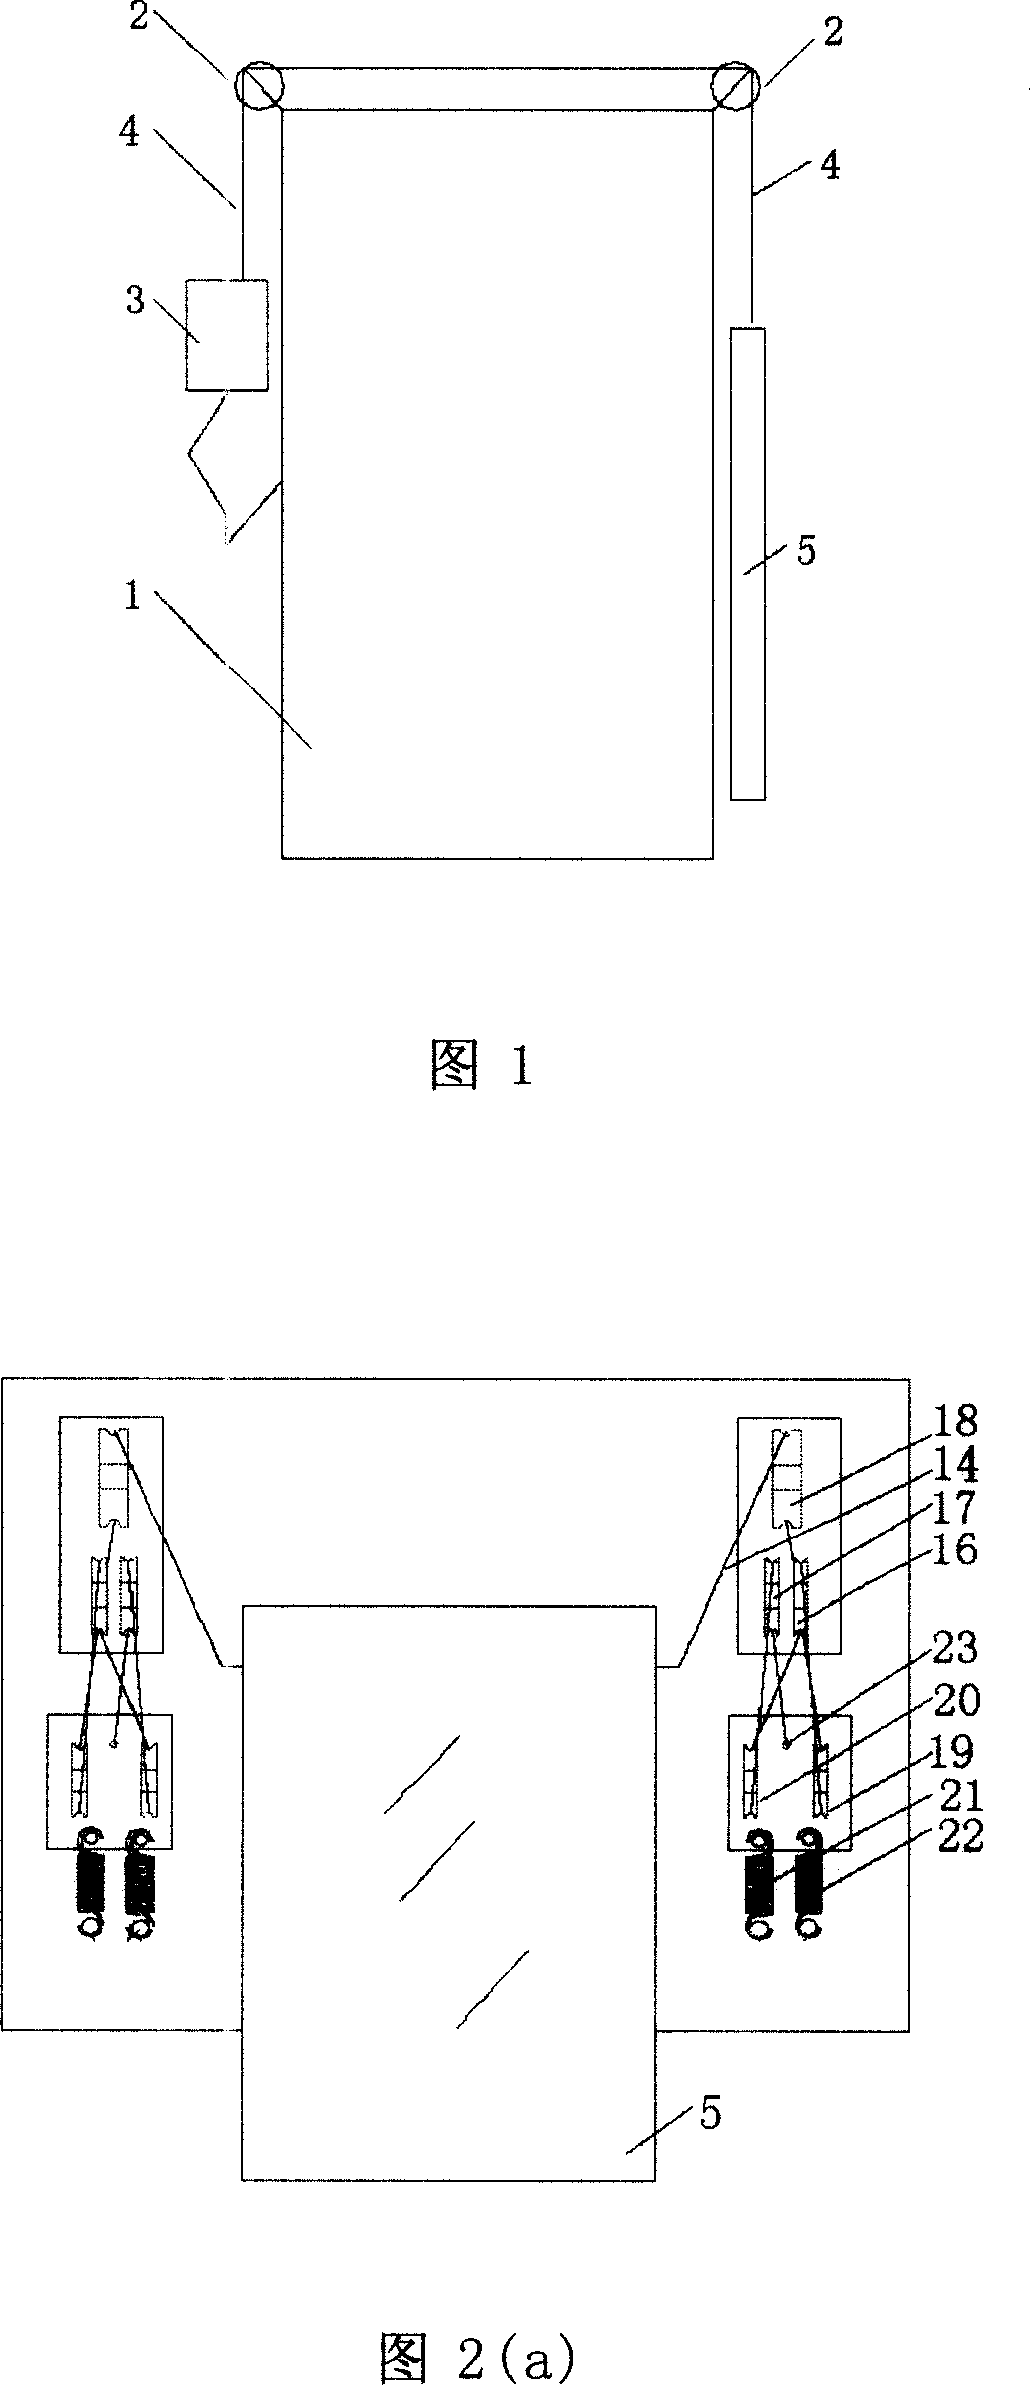 Balance suspension system for controlling strength of folding glass door of biological safety cabinet